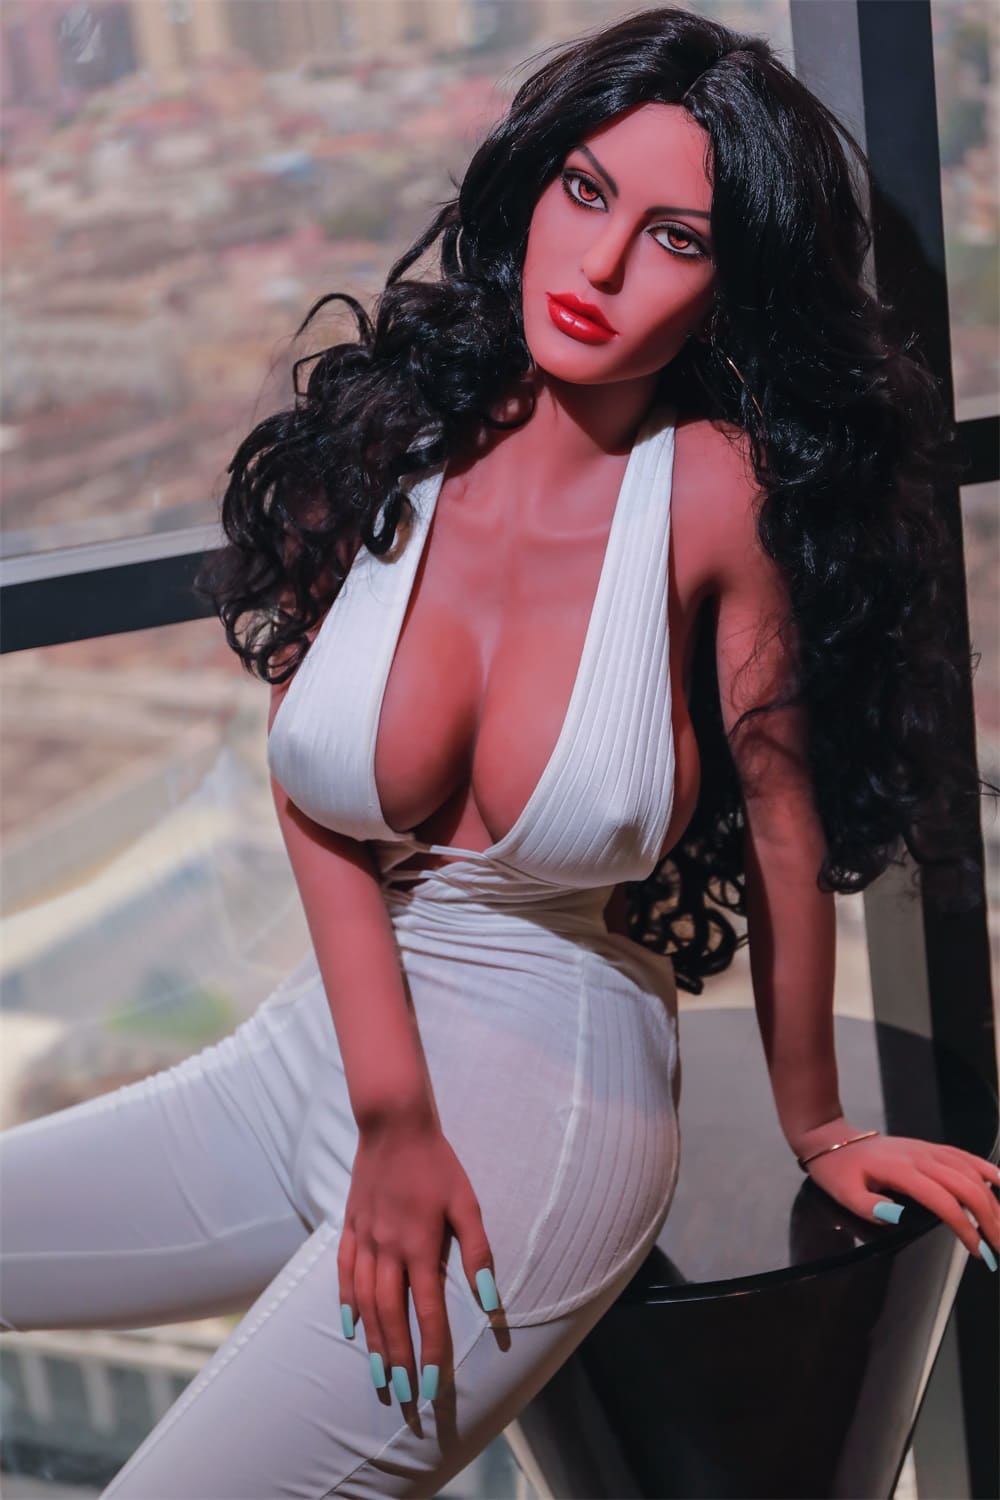 In Stock 5.58ft/170cm New Realistic Sex Dolls - Sinclair